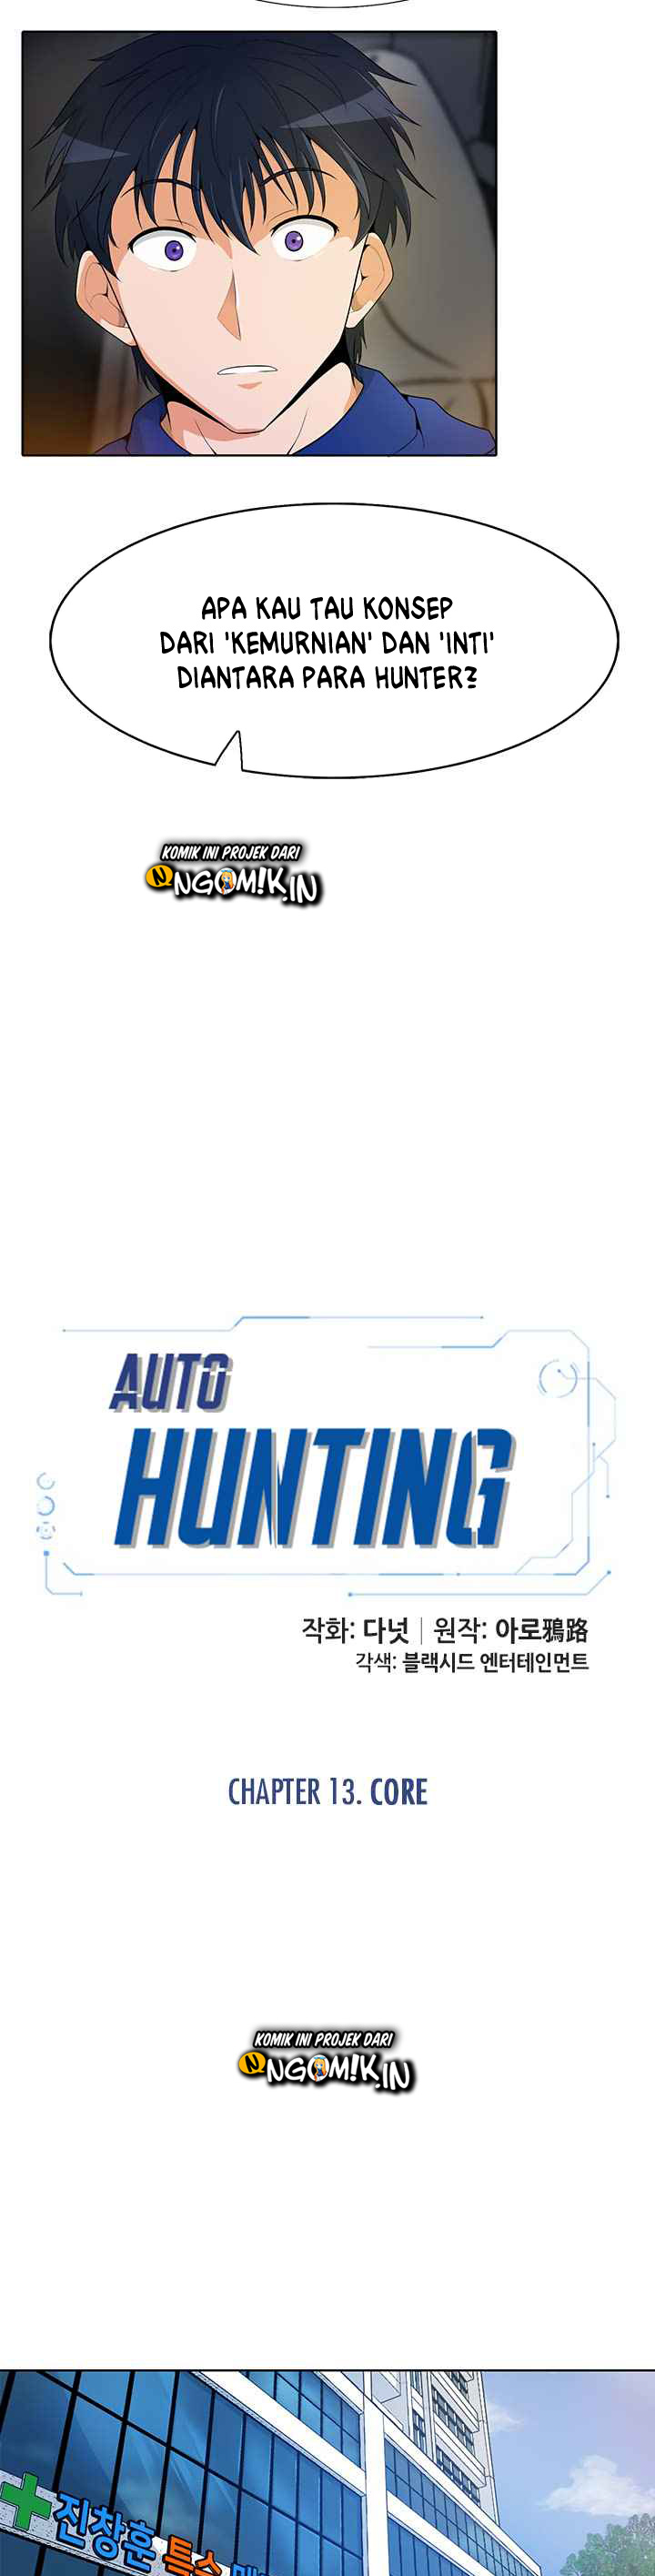 Auto Hunting Chapter 13